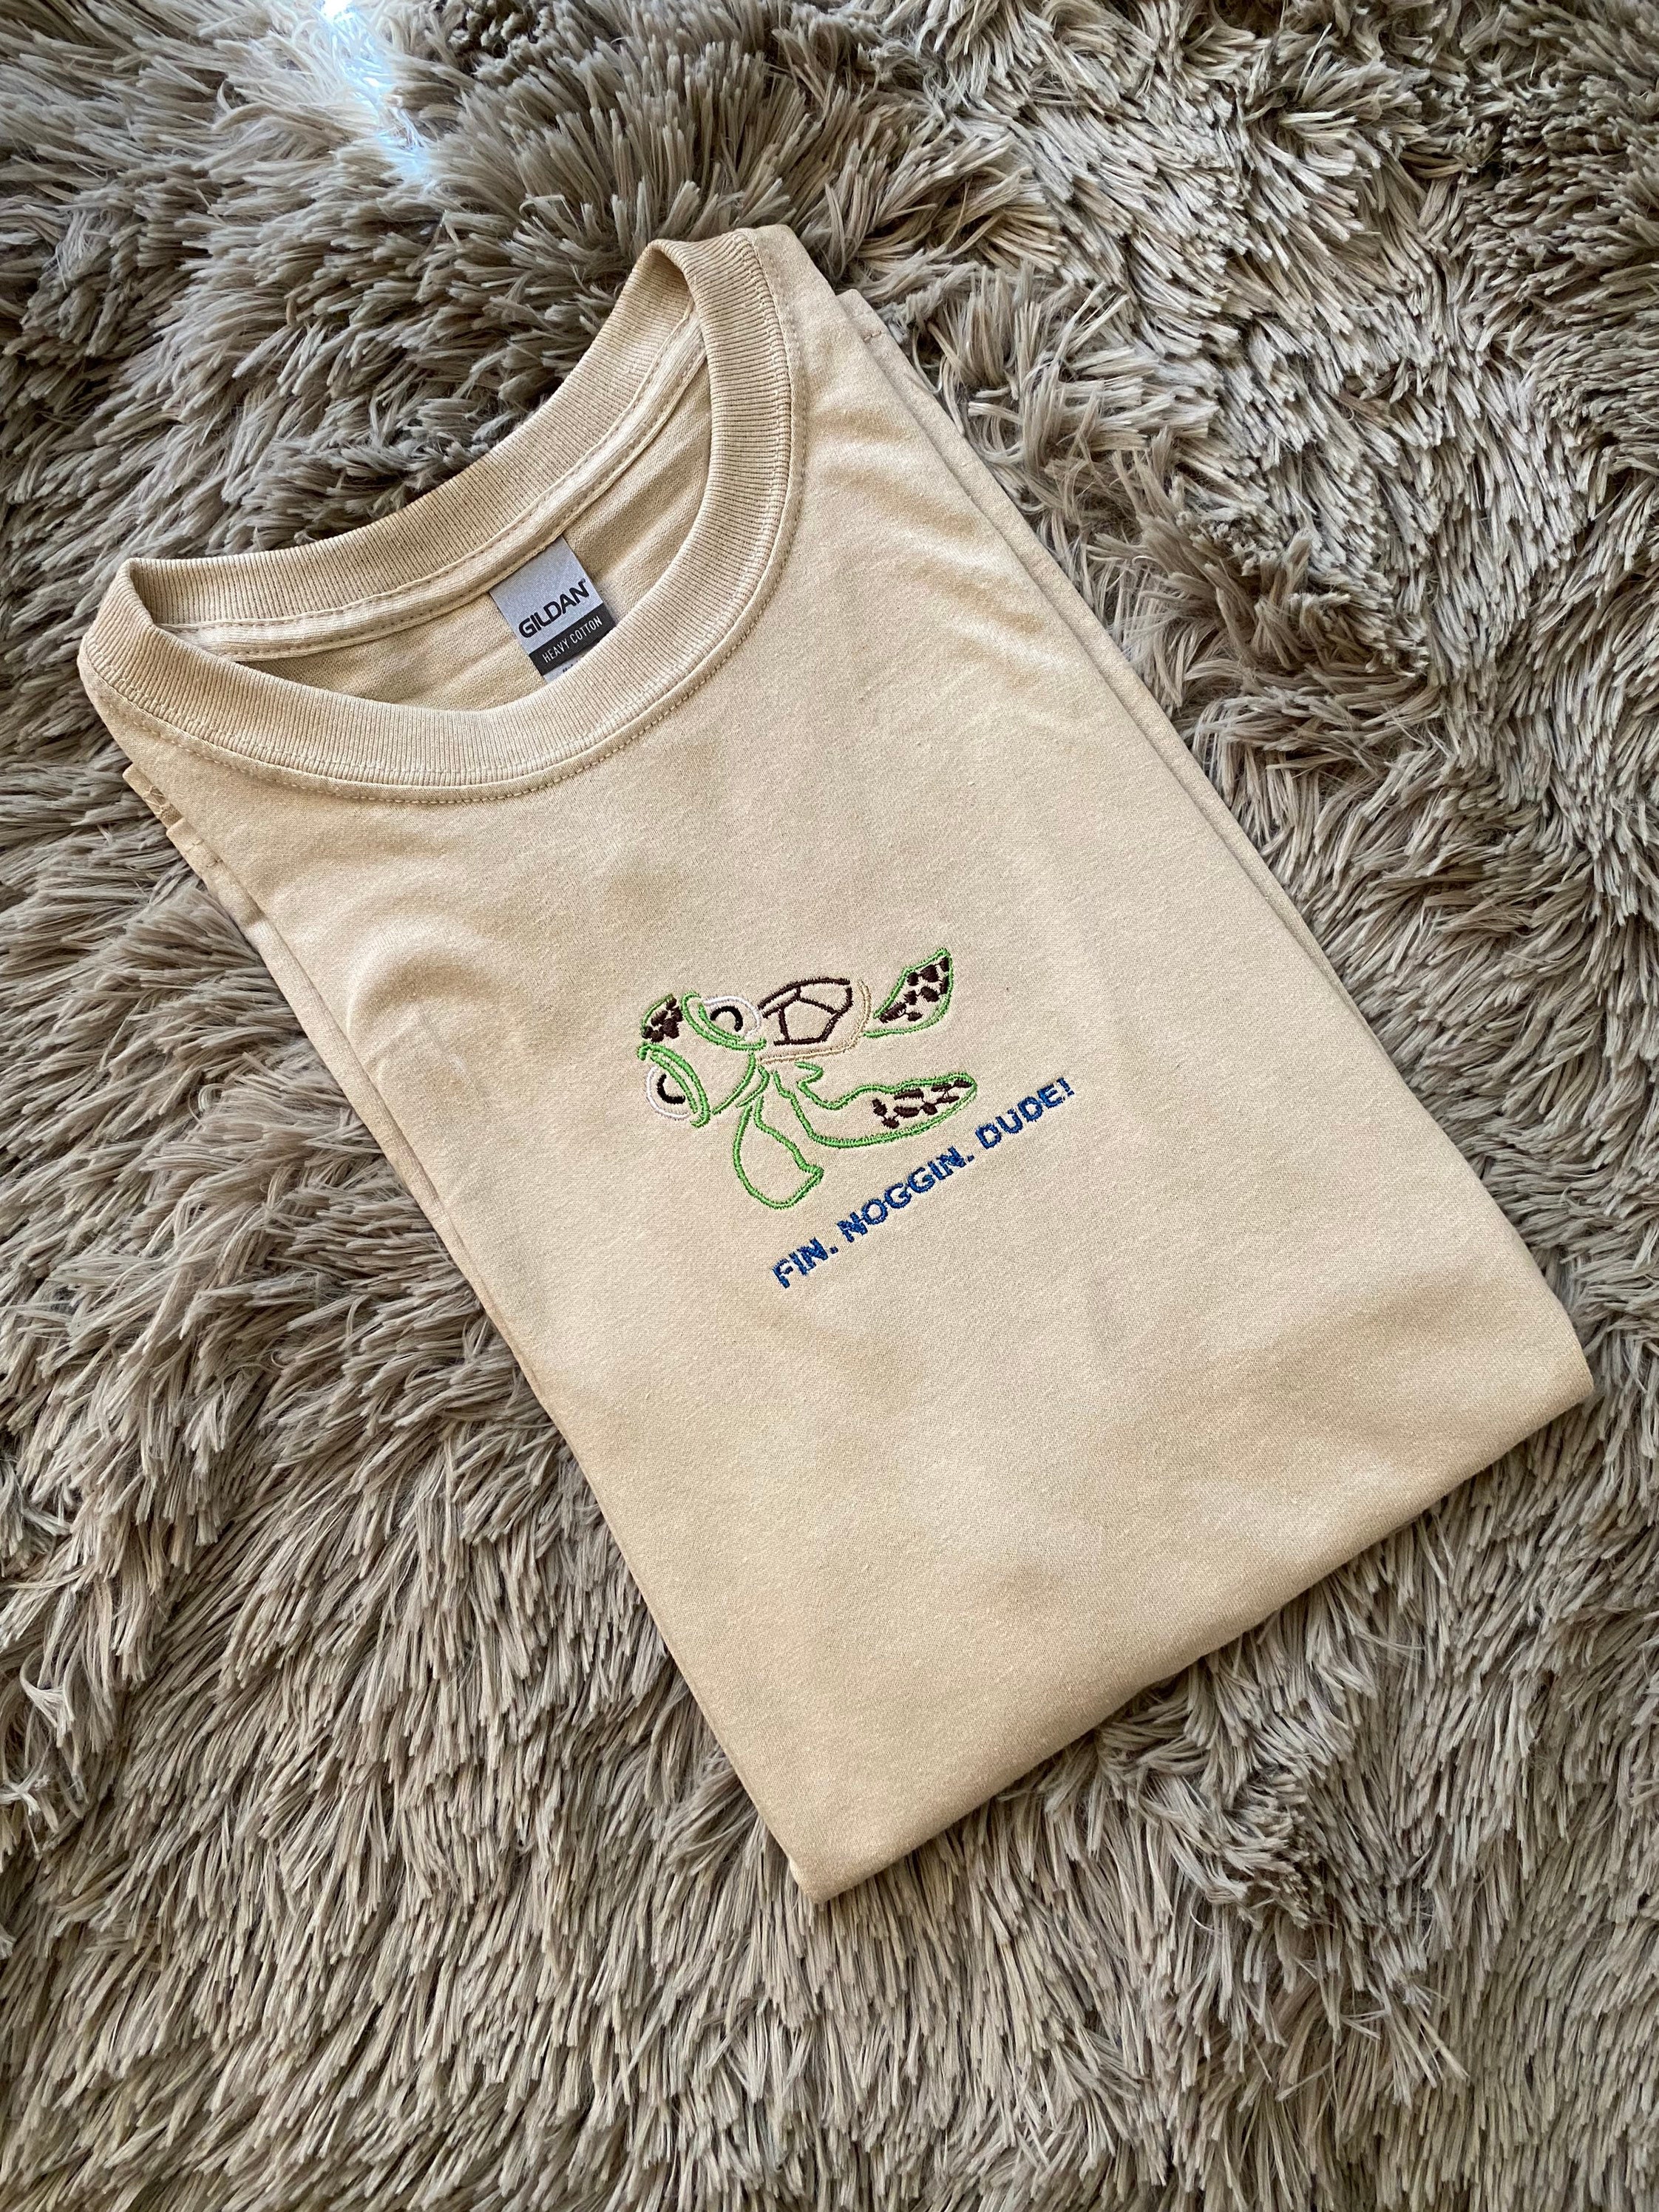 Squirt embroidered sweatshirt, embroidered crewneck, embroidered